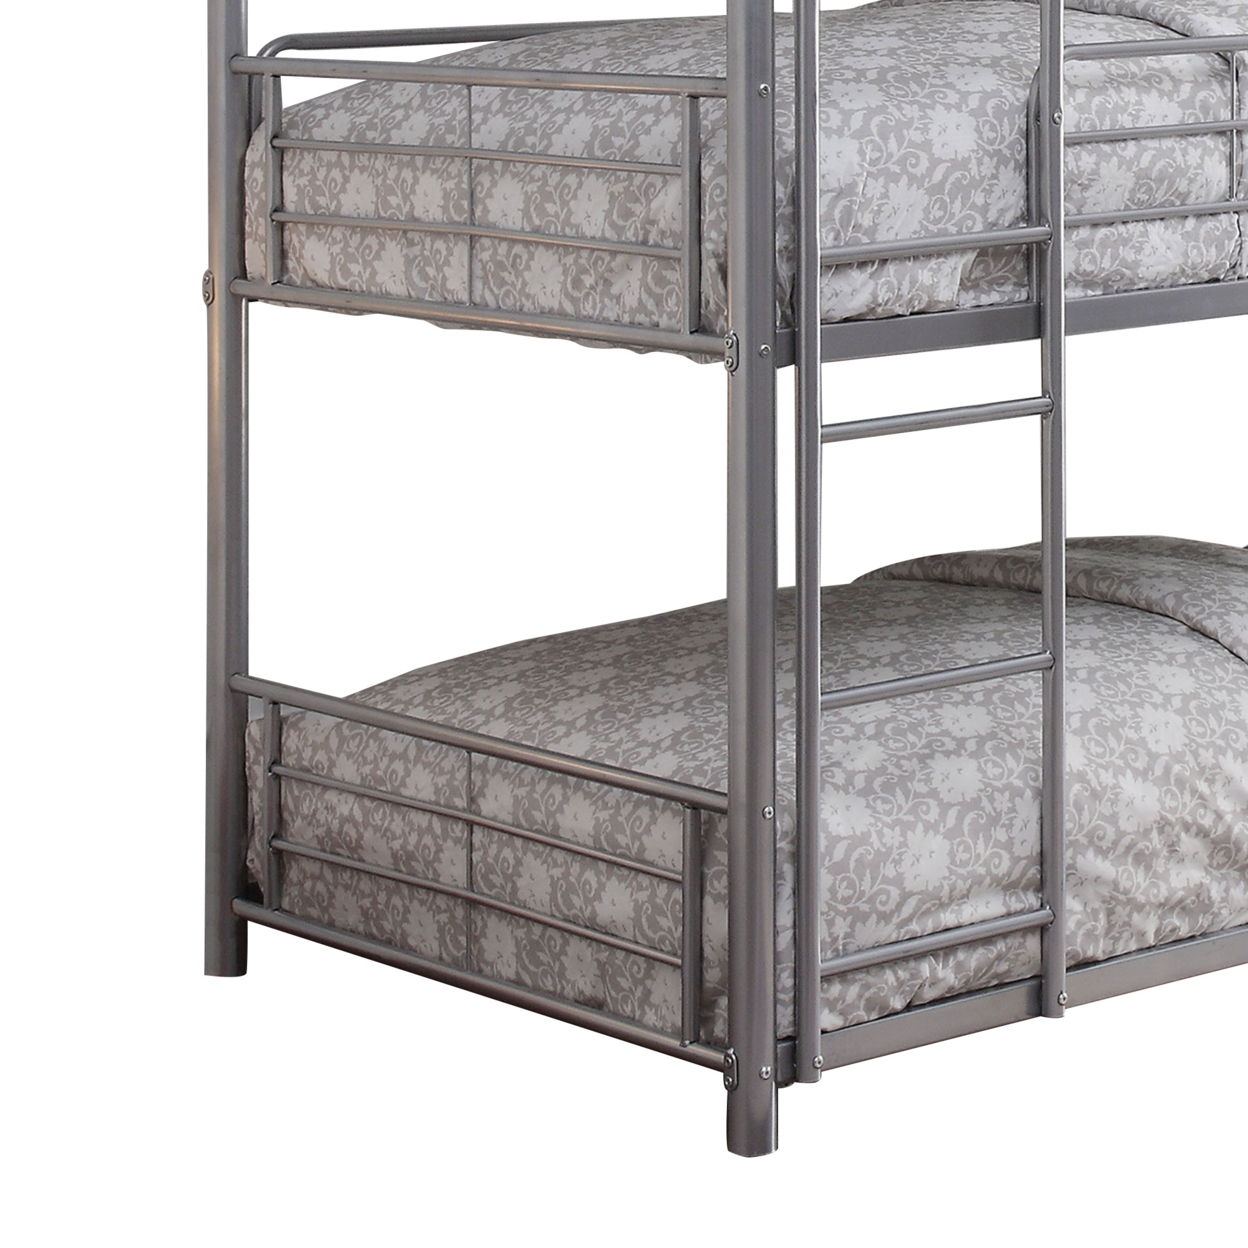 Metal Triple Twin Over Twin Size Bunk Bed With Built In Ladder, Silver- Saltoro Sherpi